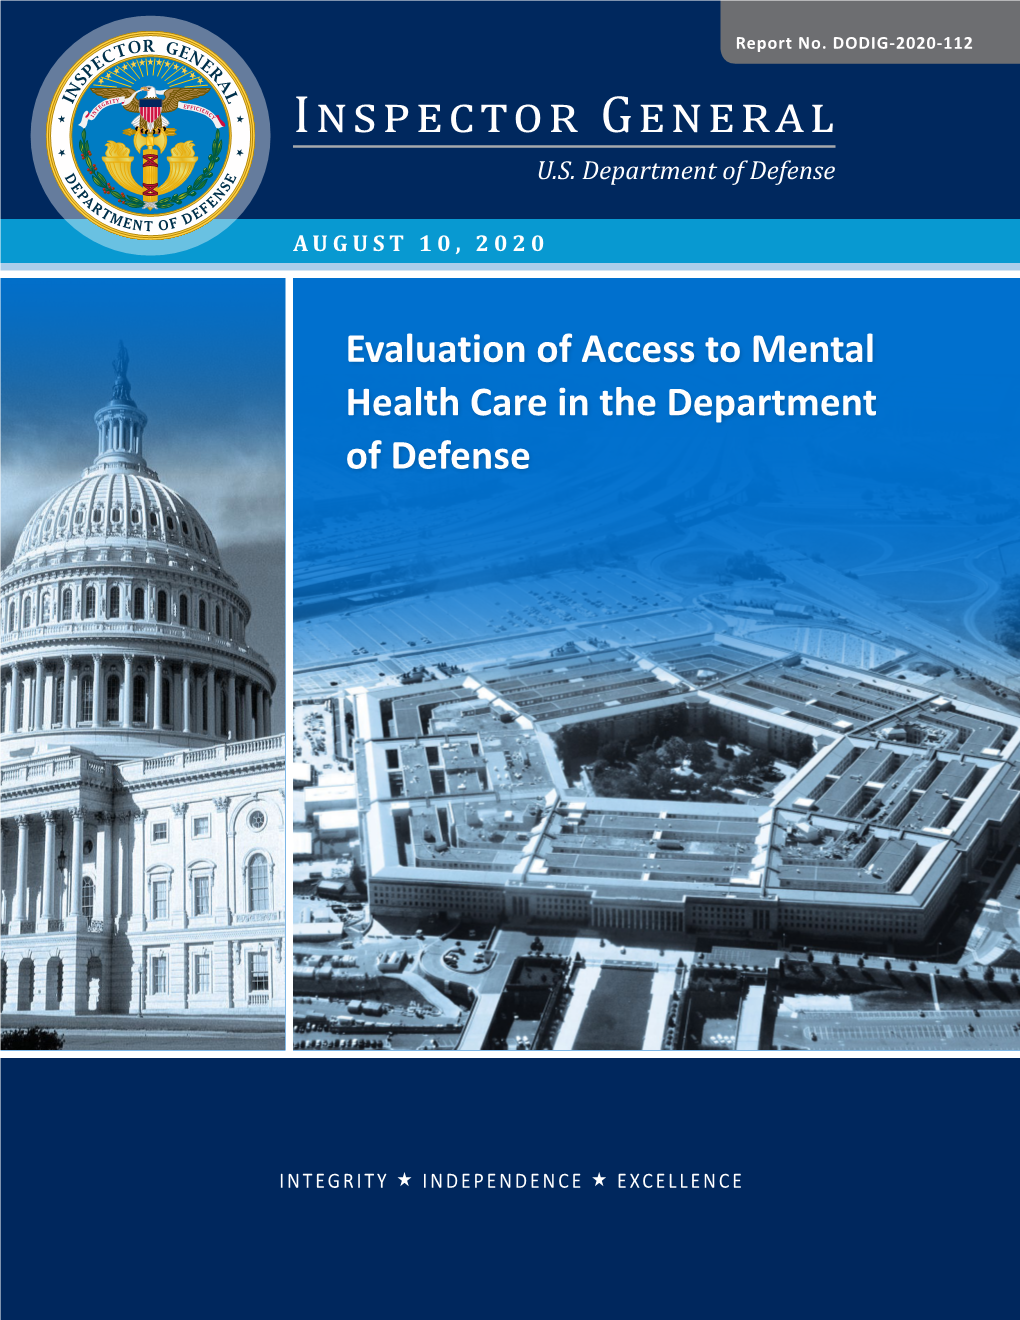 Evaluation of Access to Mental Health Care in the Department of Defense